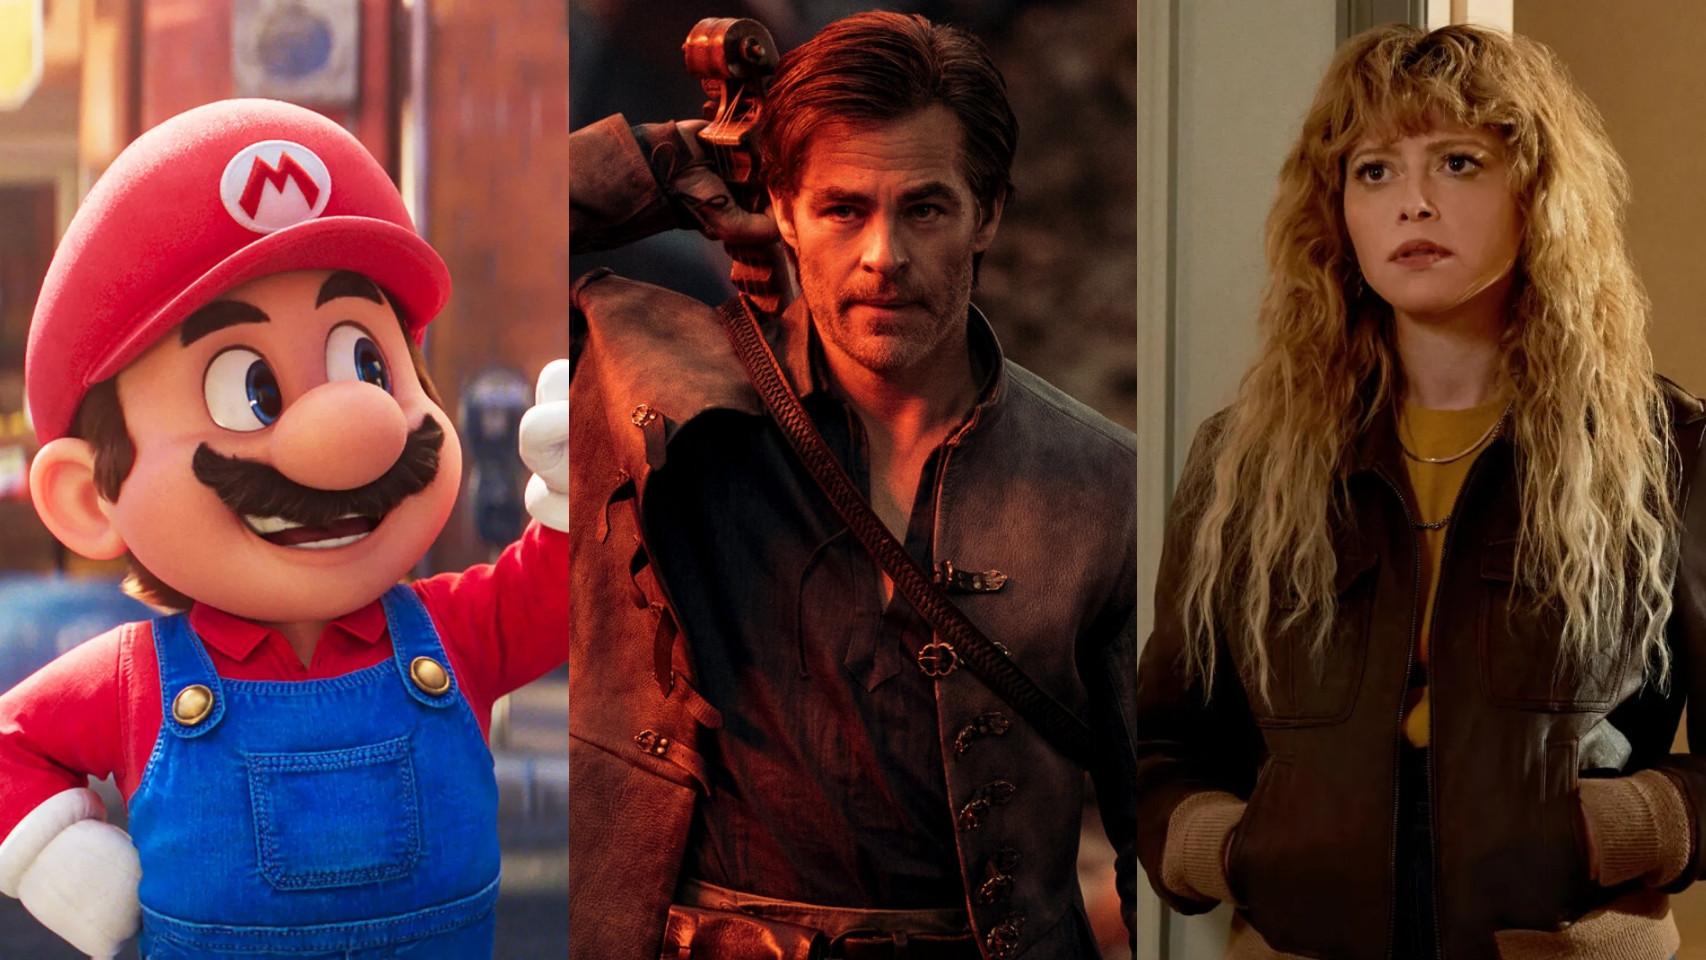 Super Mario Bros. Movie,' 'Poker Face' Coming to SkyShowtime in Fall